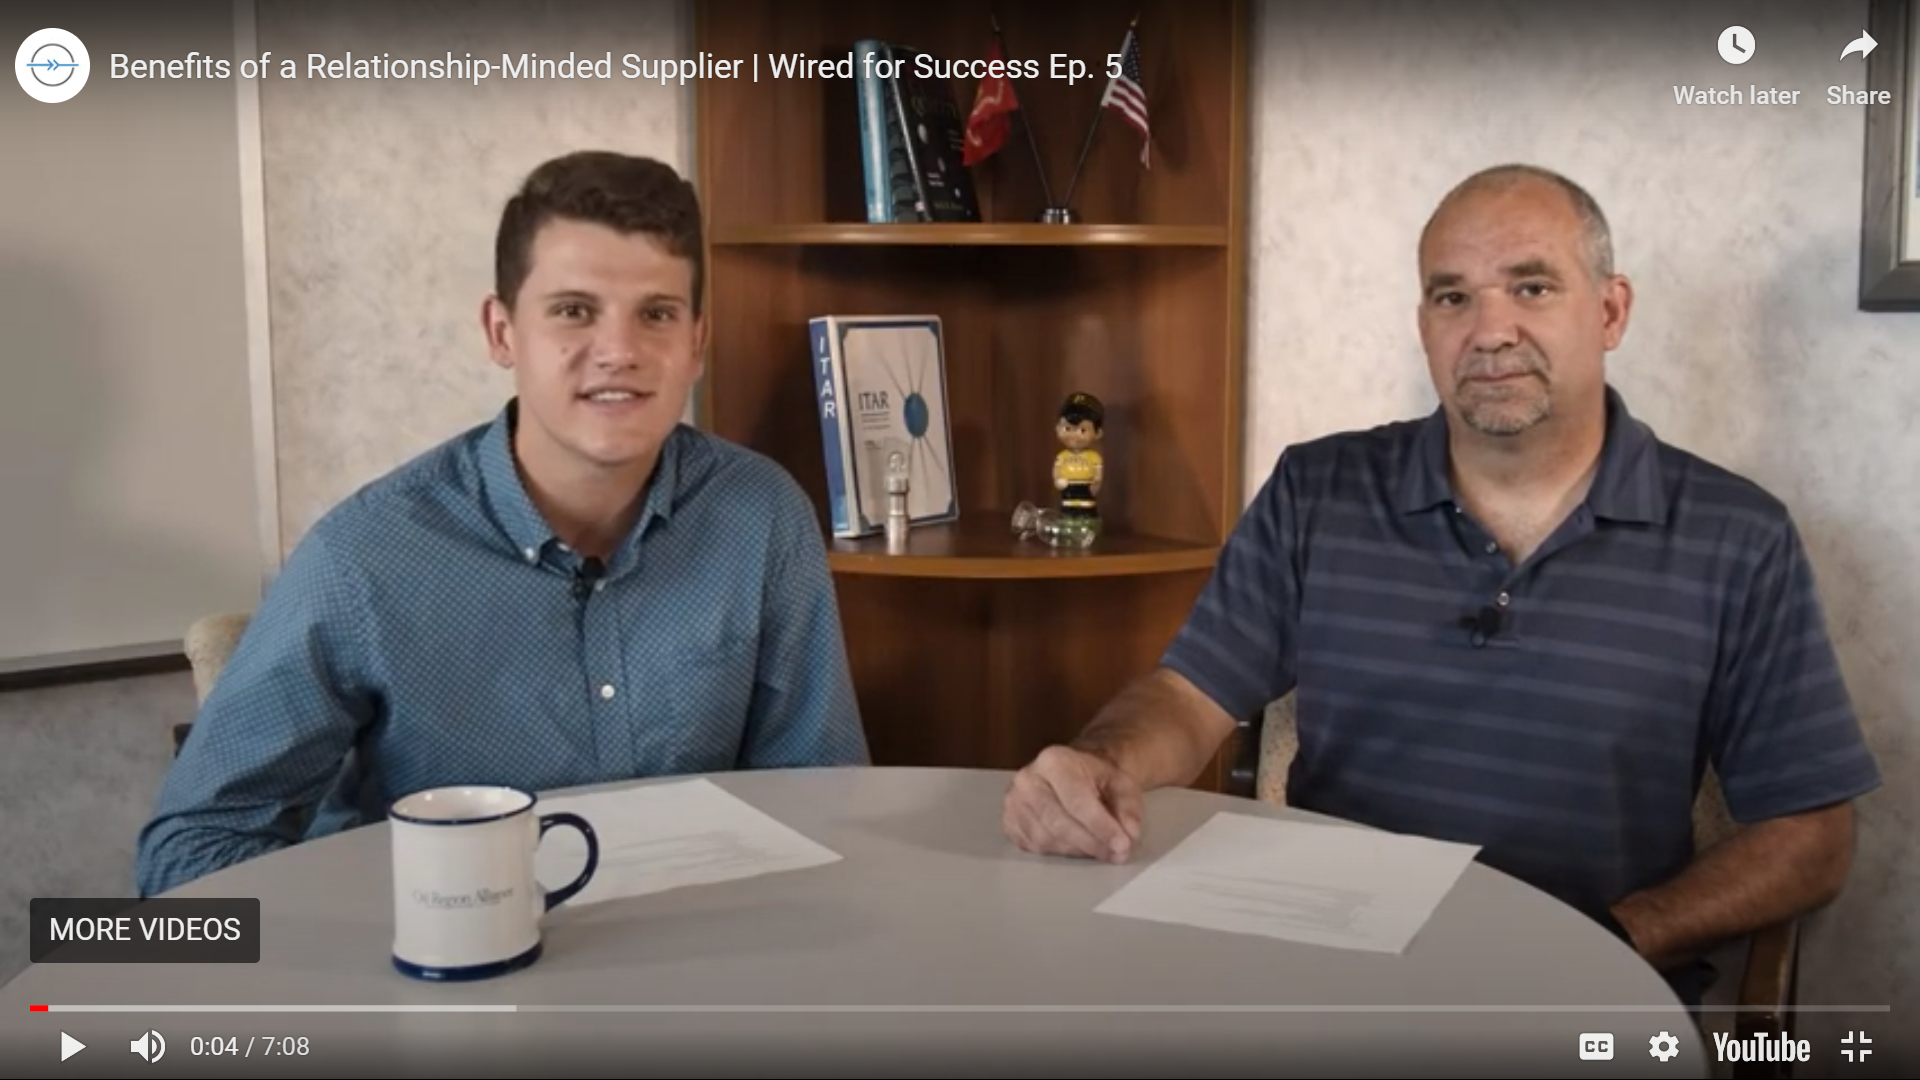 2020 09 28 11 41 12 Benefits of a Relationship Minded Supplier Video | Benefits of a Relationship-Minded Supplier [Video], Liberty Electronics®